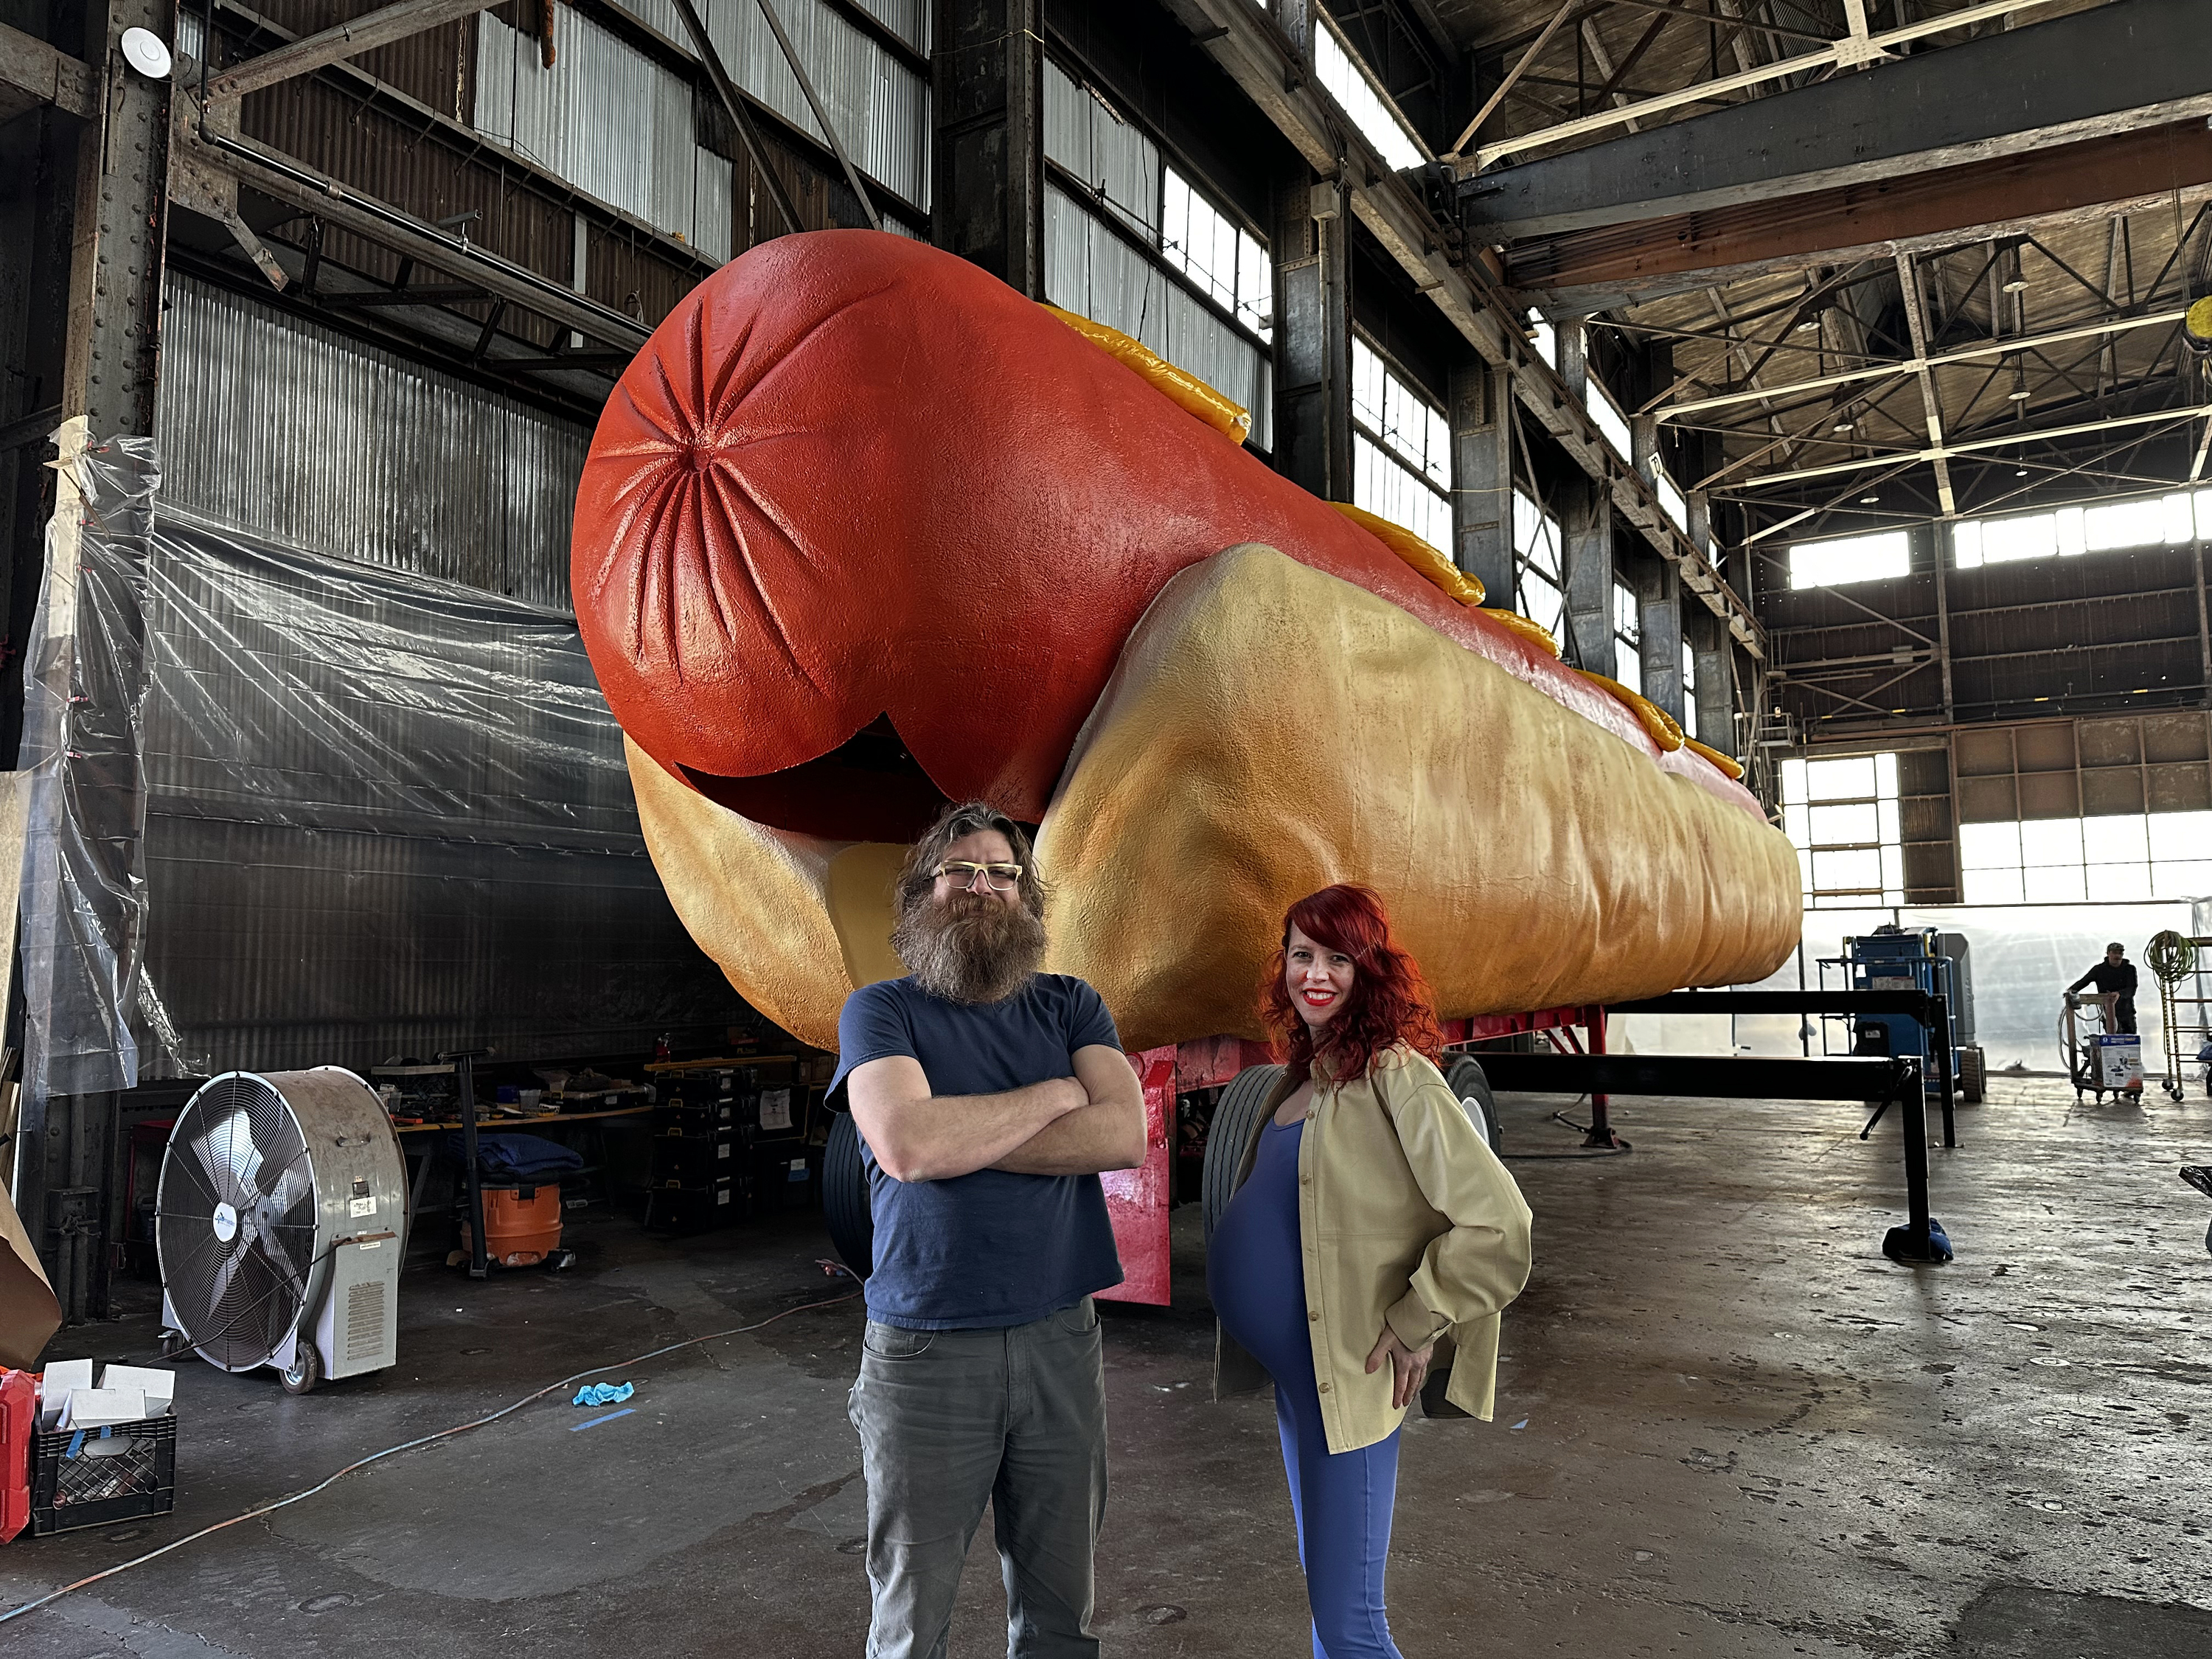 Jen Catron and Paul Outlaw in front of the giant hot dog